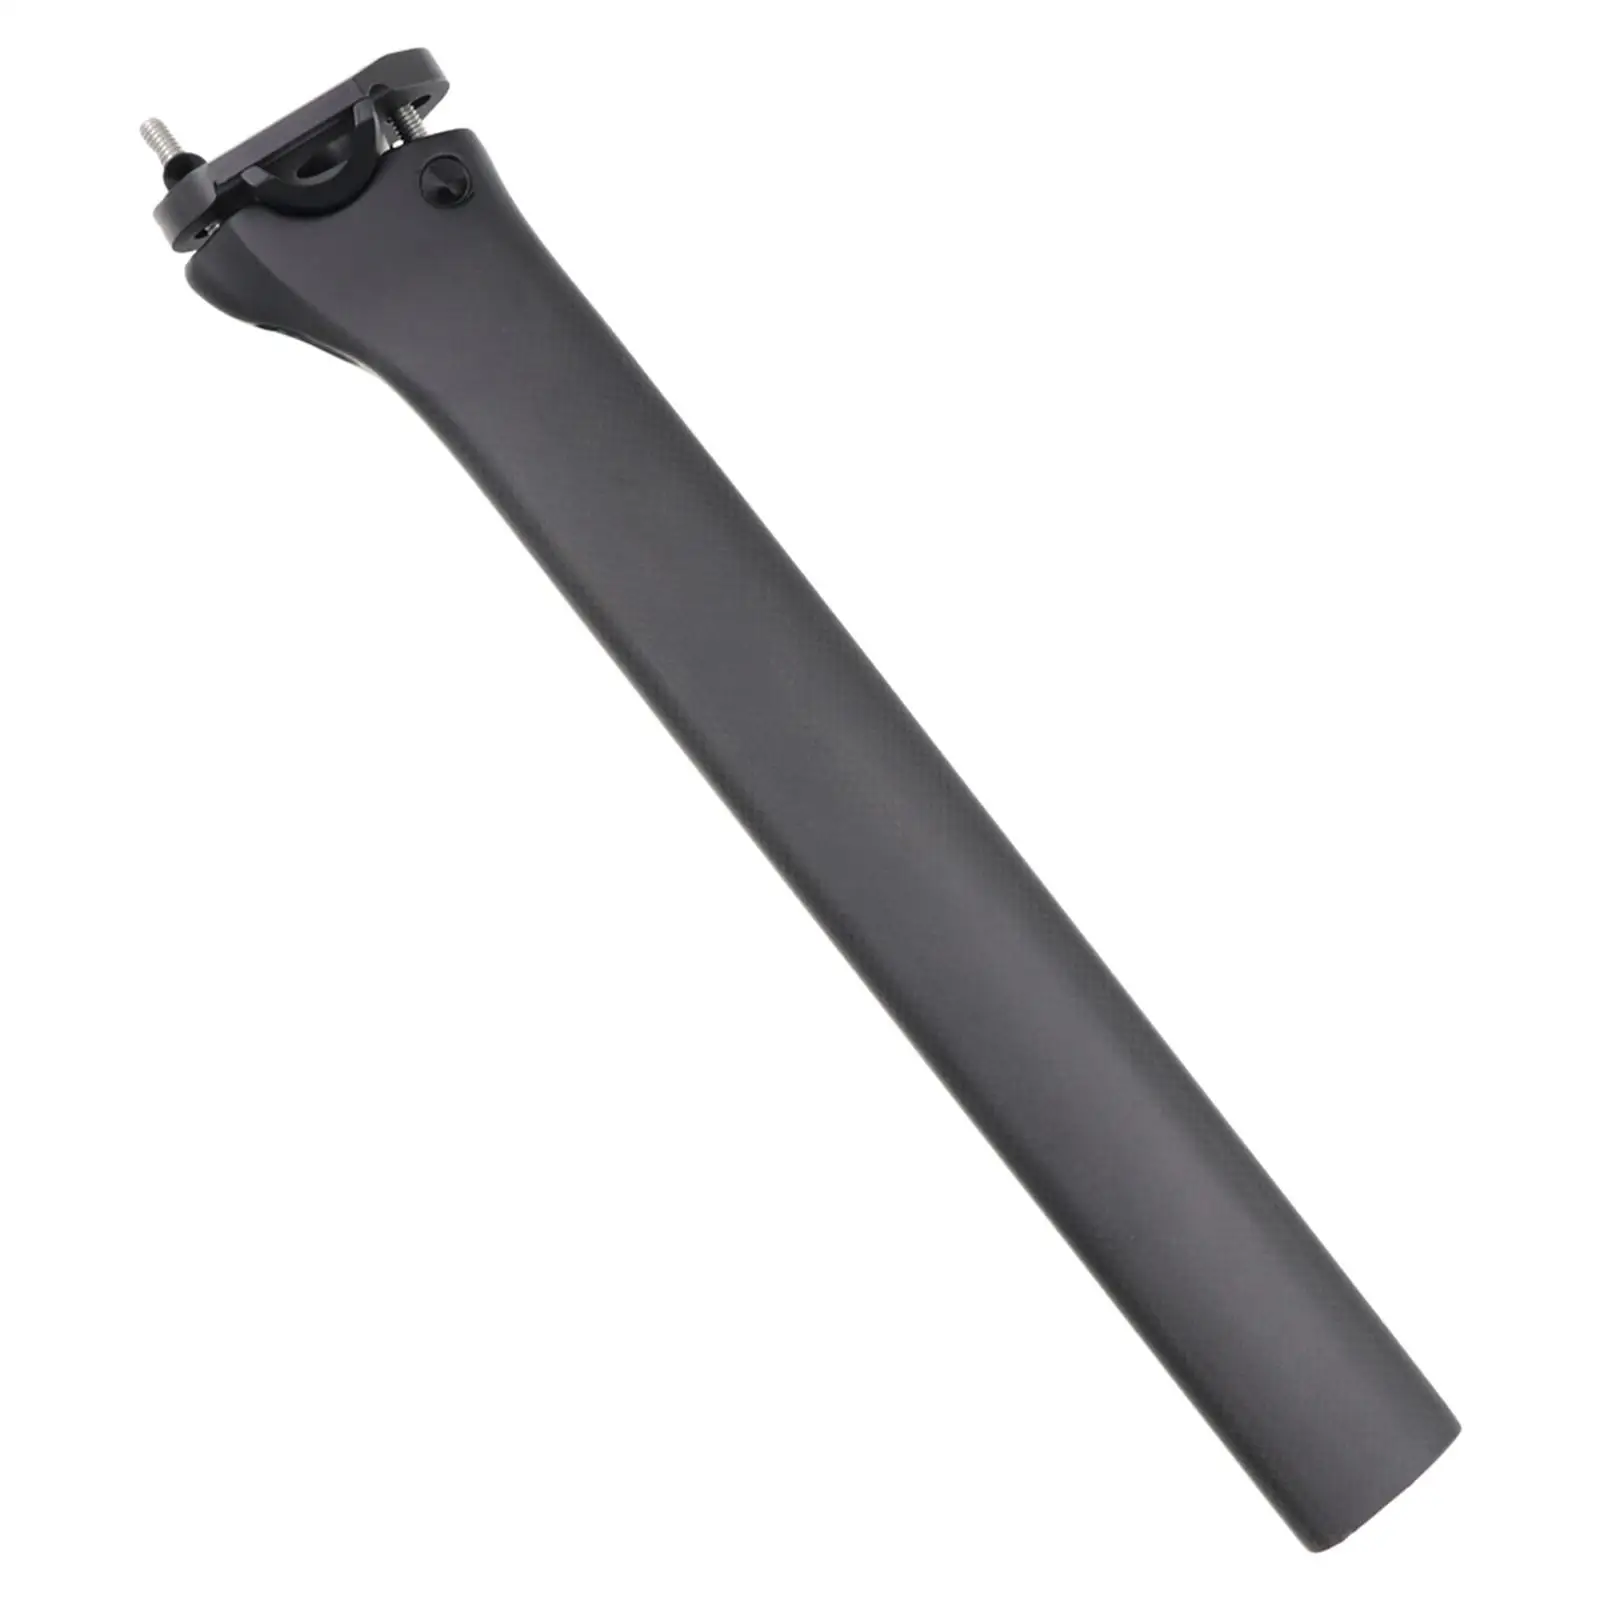  Bike Seat Post Lightweight Cycling 340mm Seatpost 8/F10/F12   Replacement Saddle Tube